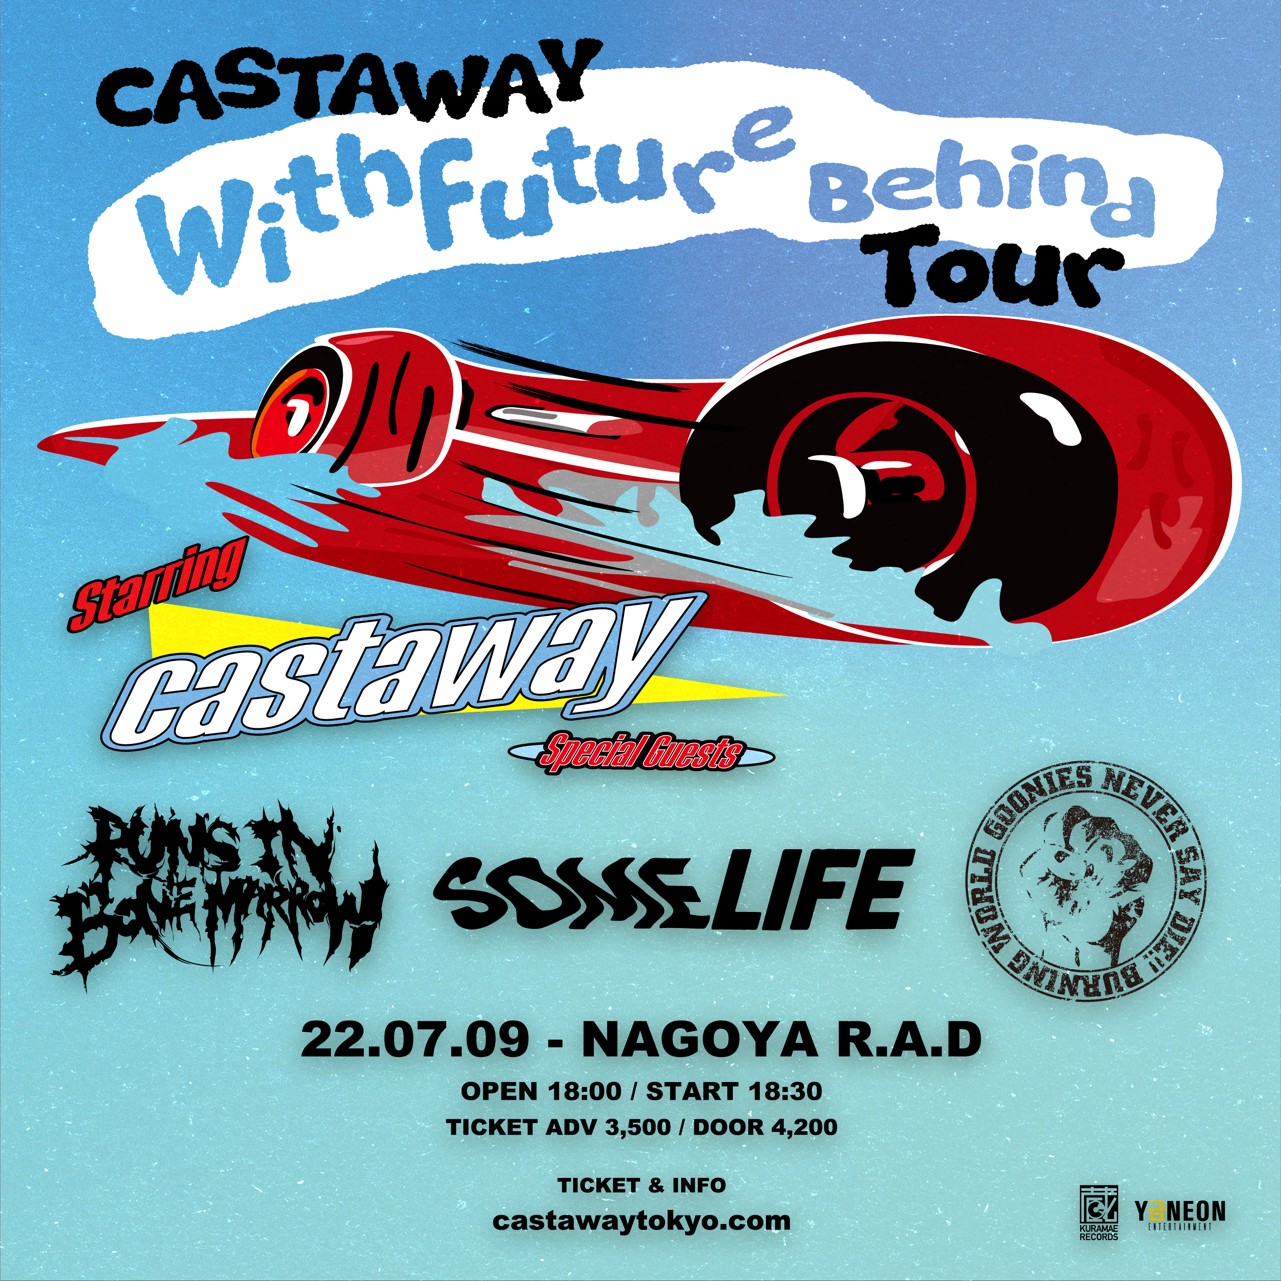 Castaway pre. With Future Behind tour